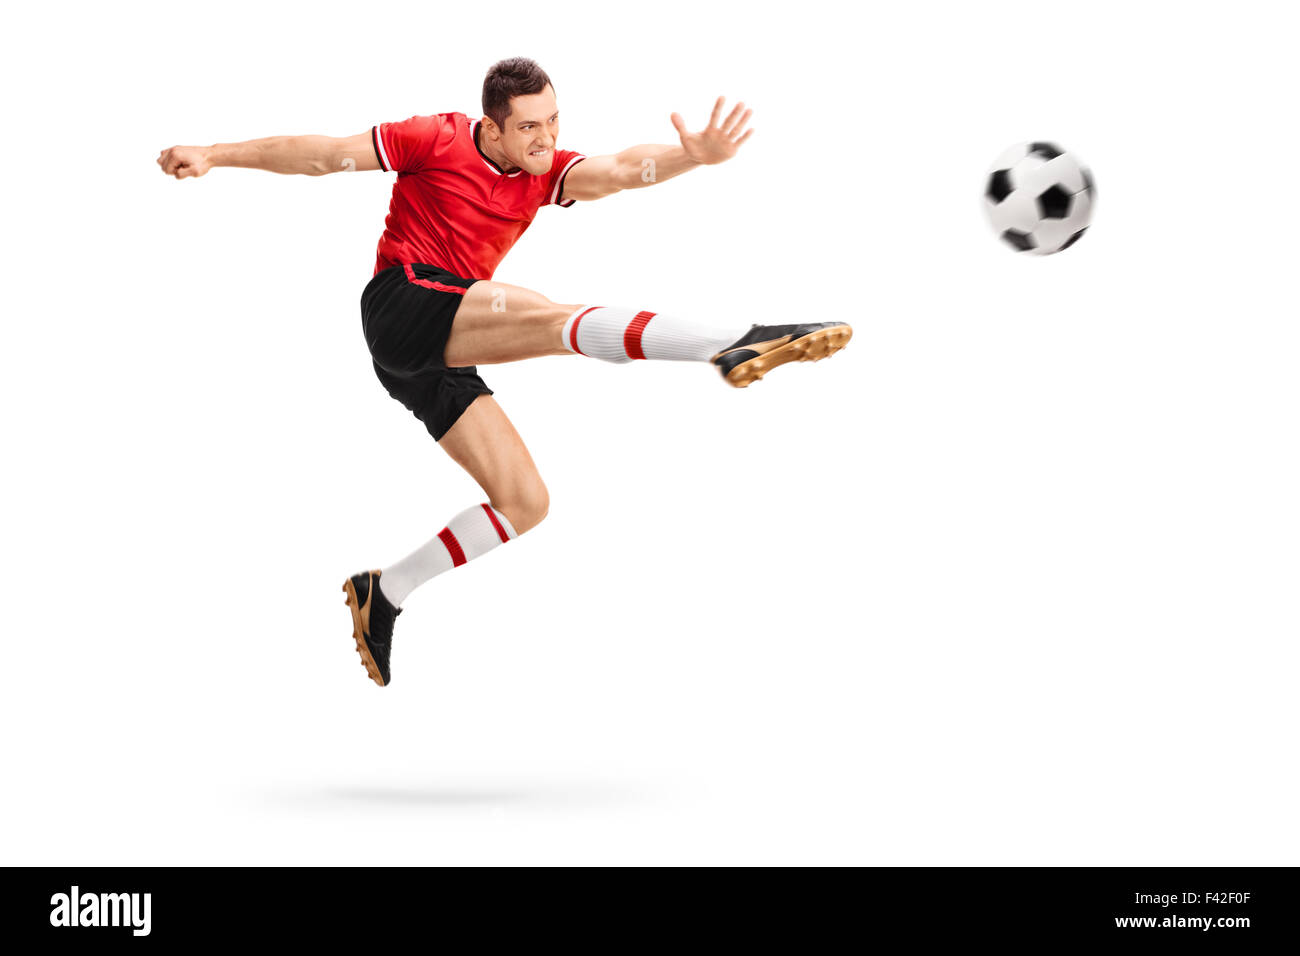 Studio shot of a male football professional kicking a ball in mid-air isolated on white background Stock Photo